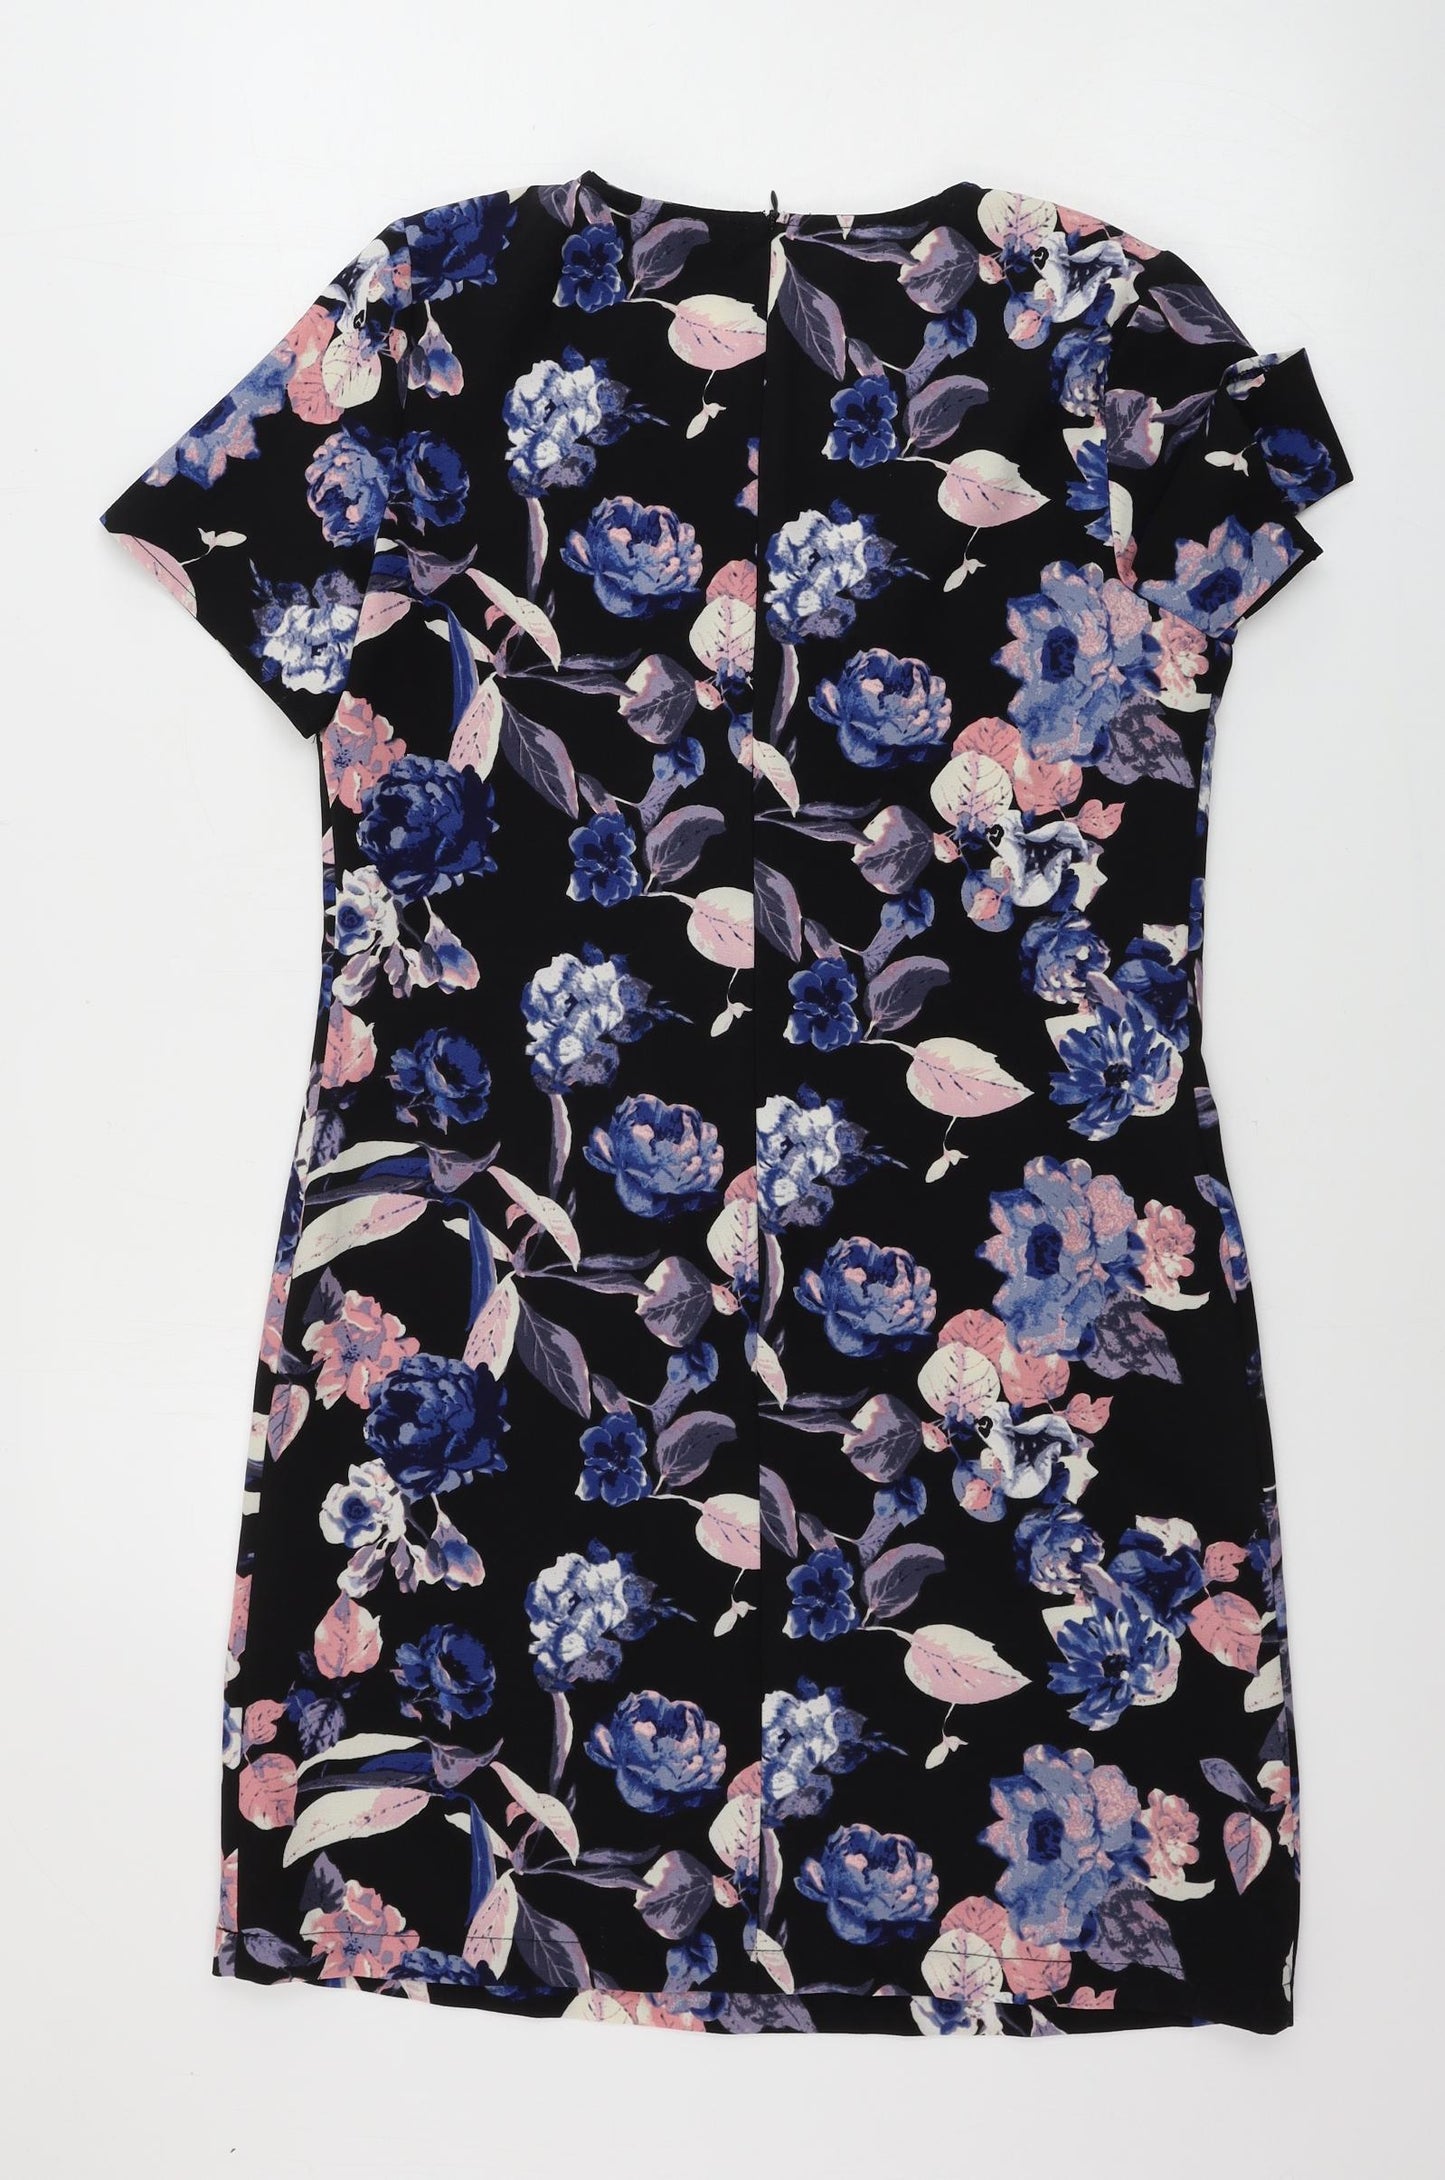 Girls On Film  Womens Black Floral  A-Line  Size 10